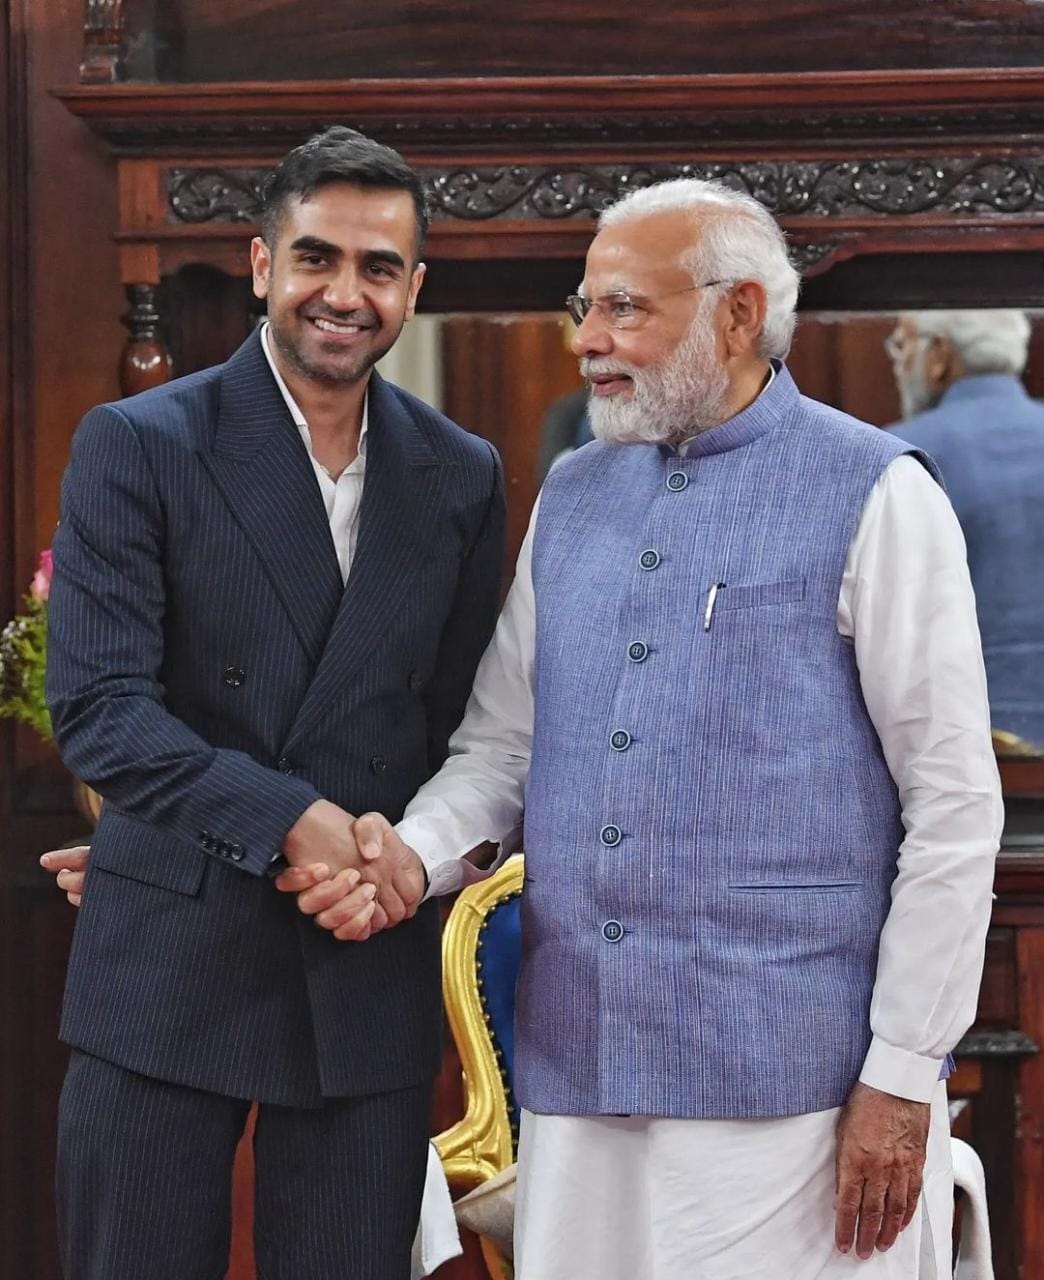 Who is Nikhil Kamath, young billionaire who attended Joe Biden’s dinner with PM Modi?